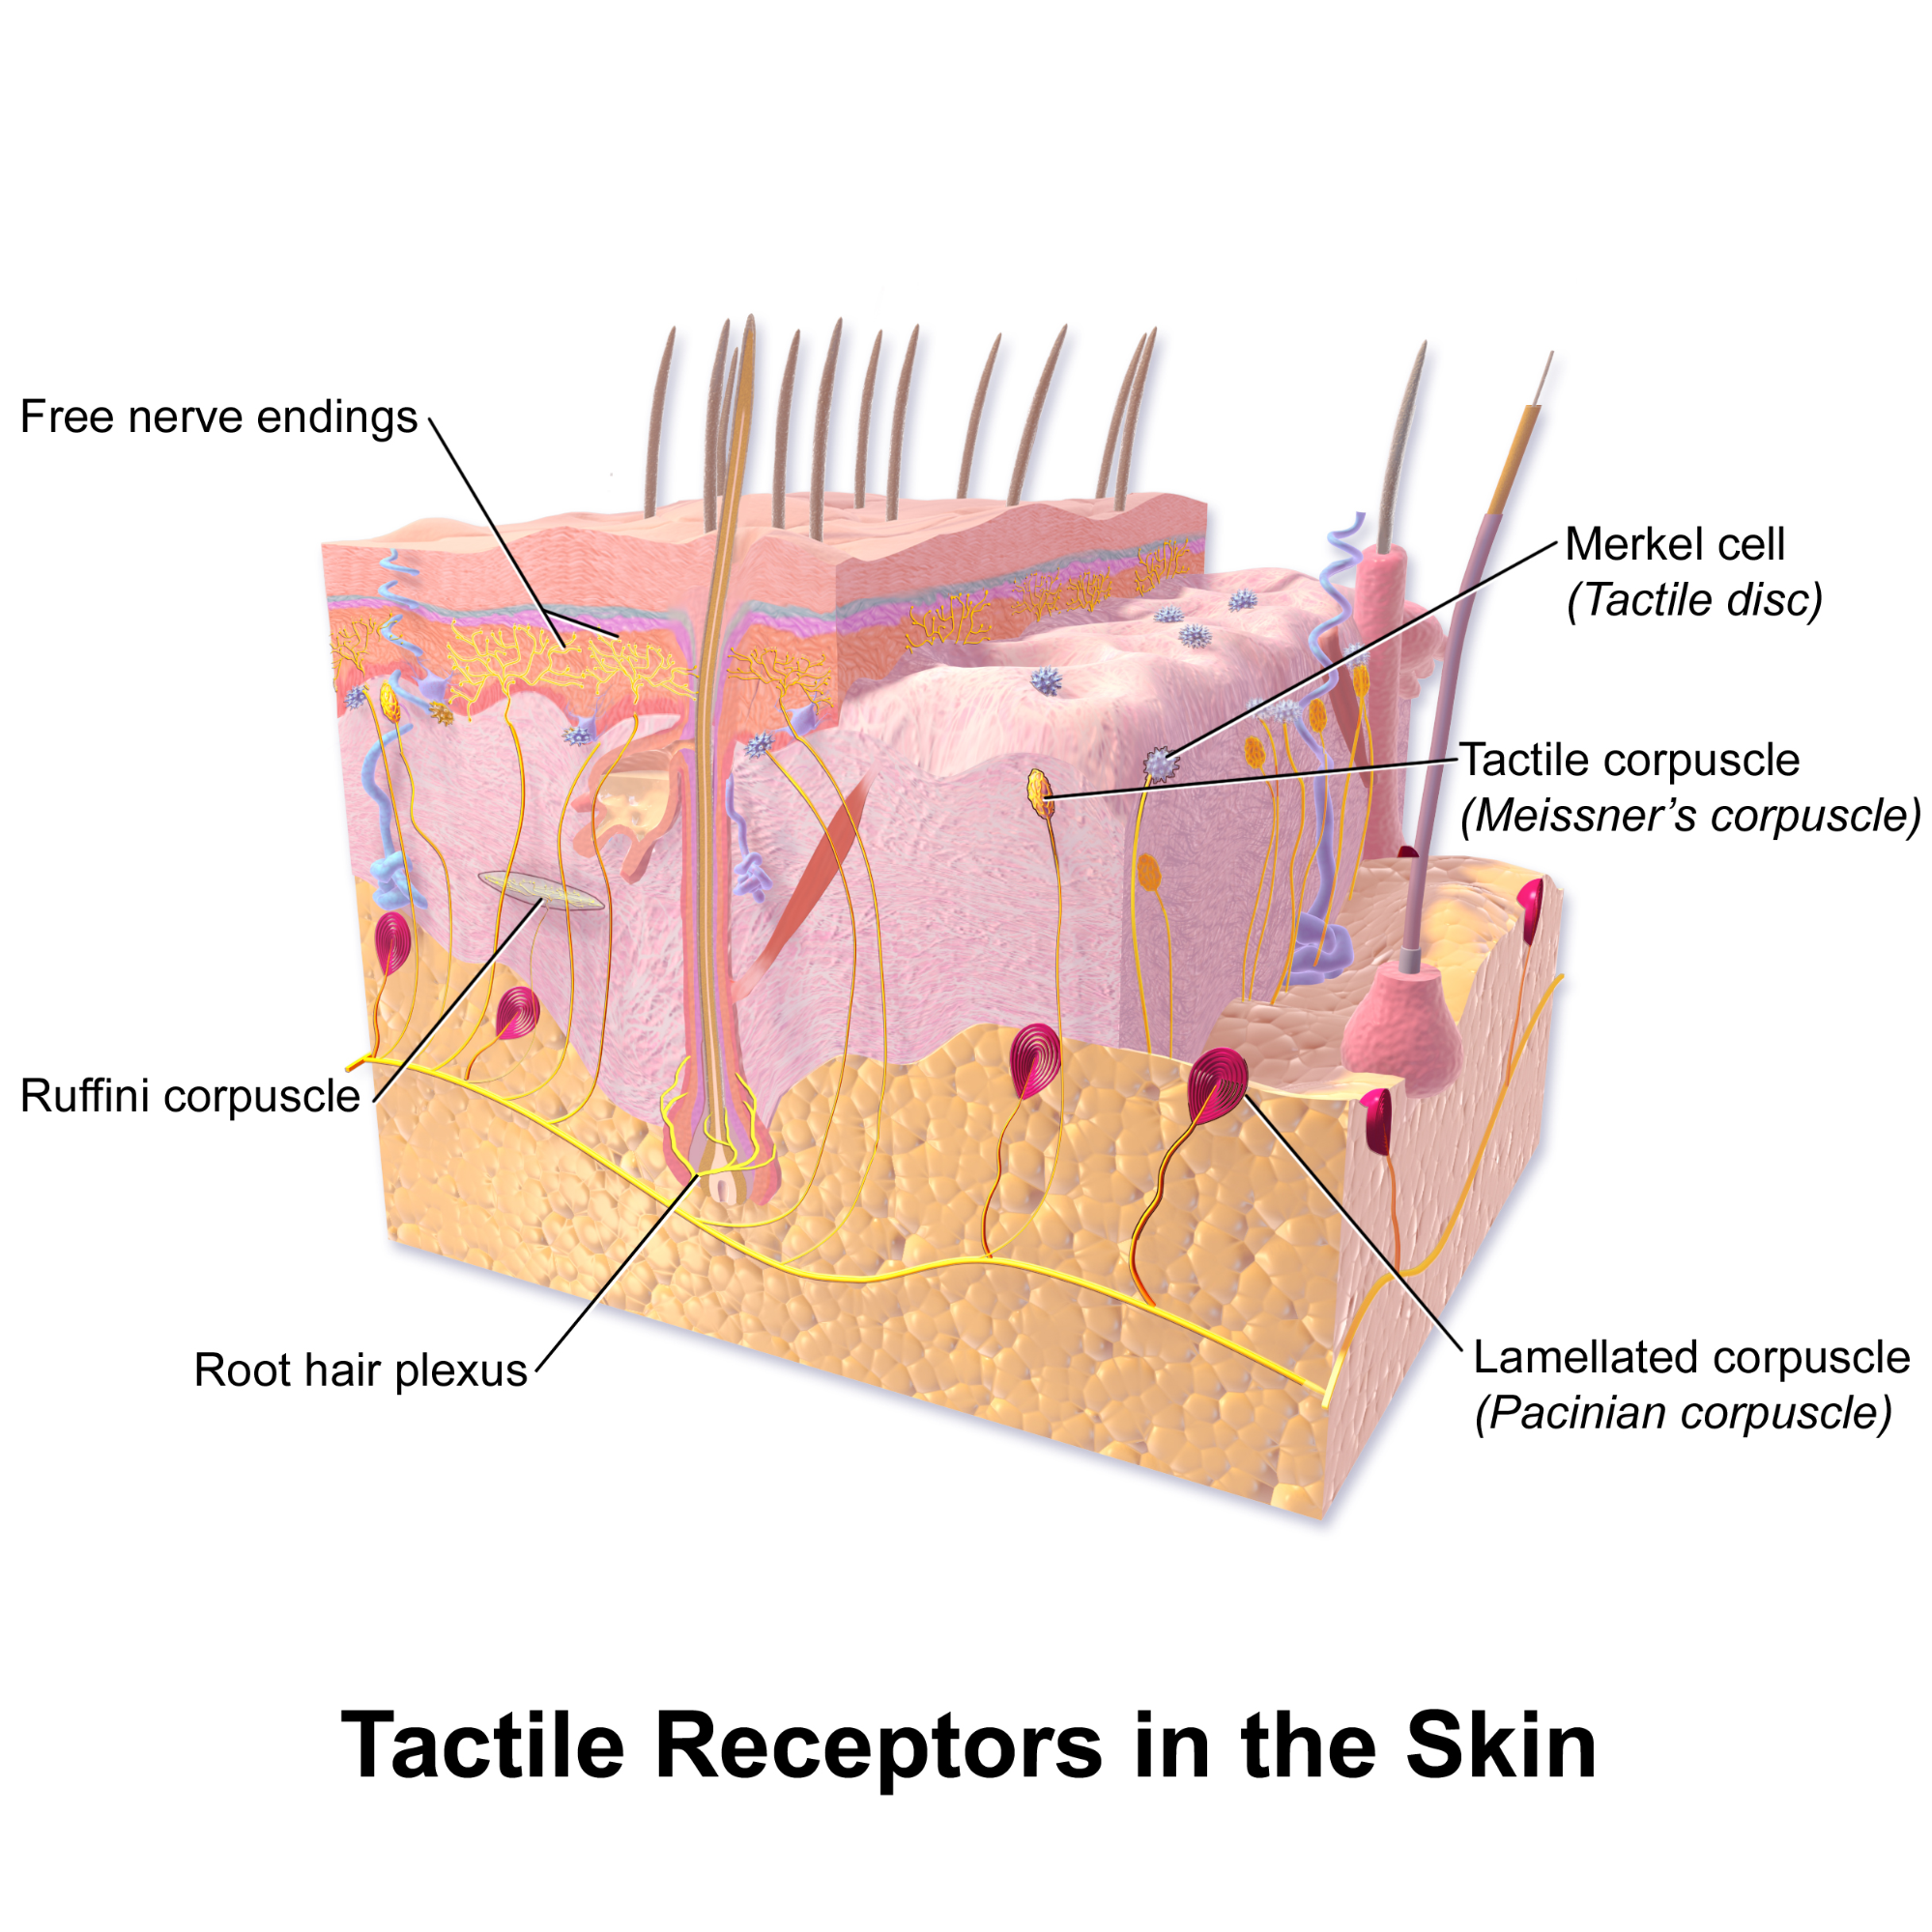 A 3D cross section of skin showing different types of receptors embedded.